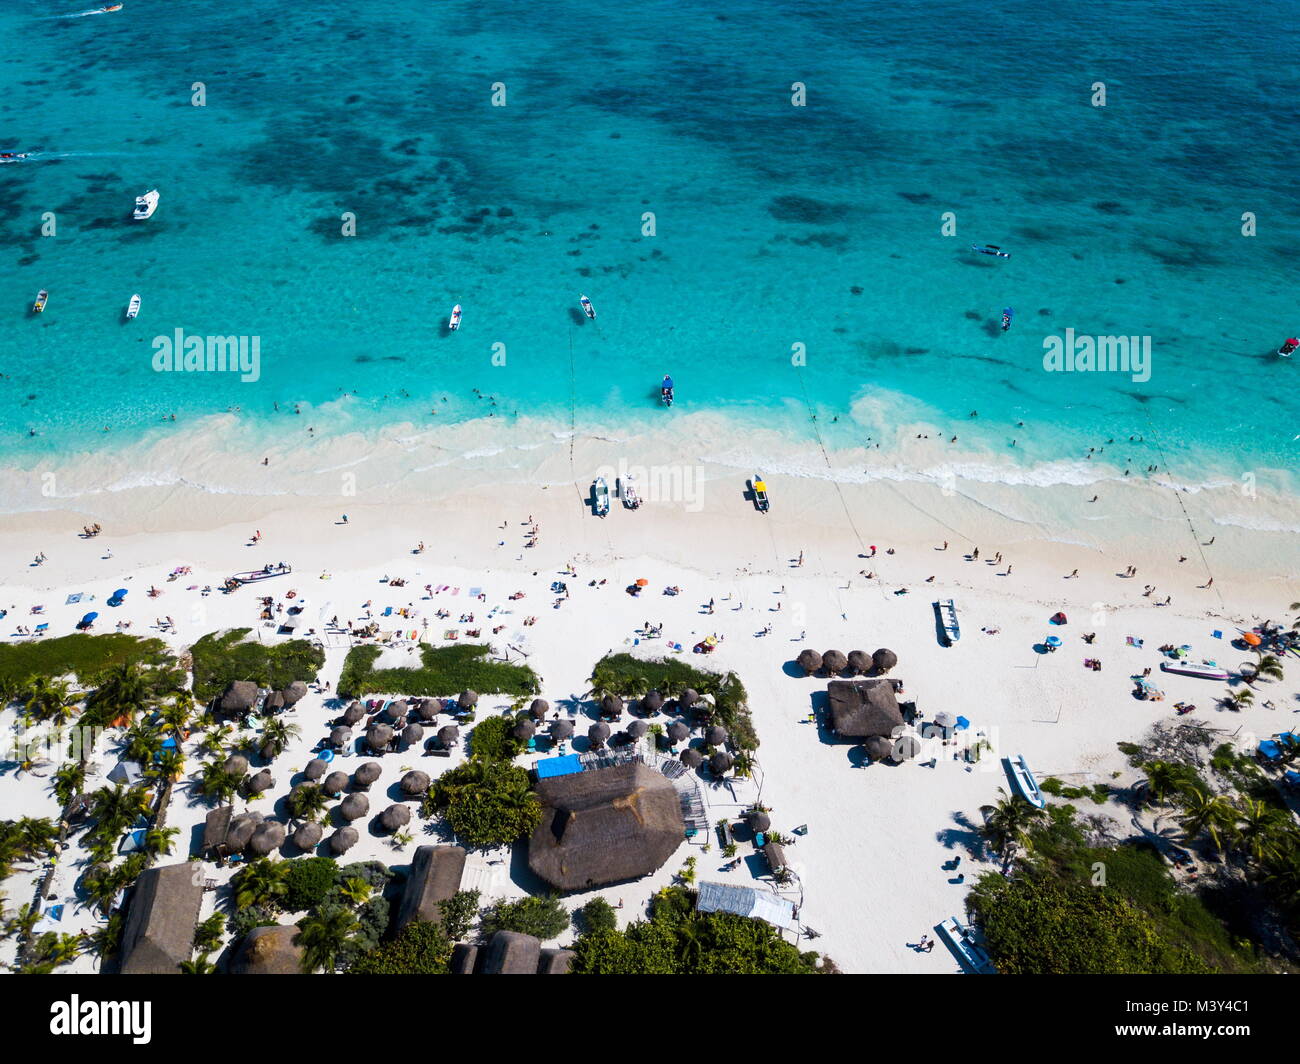 Aerial view of a beach in Tulum Mexico on a sunny day Stock Photo